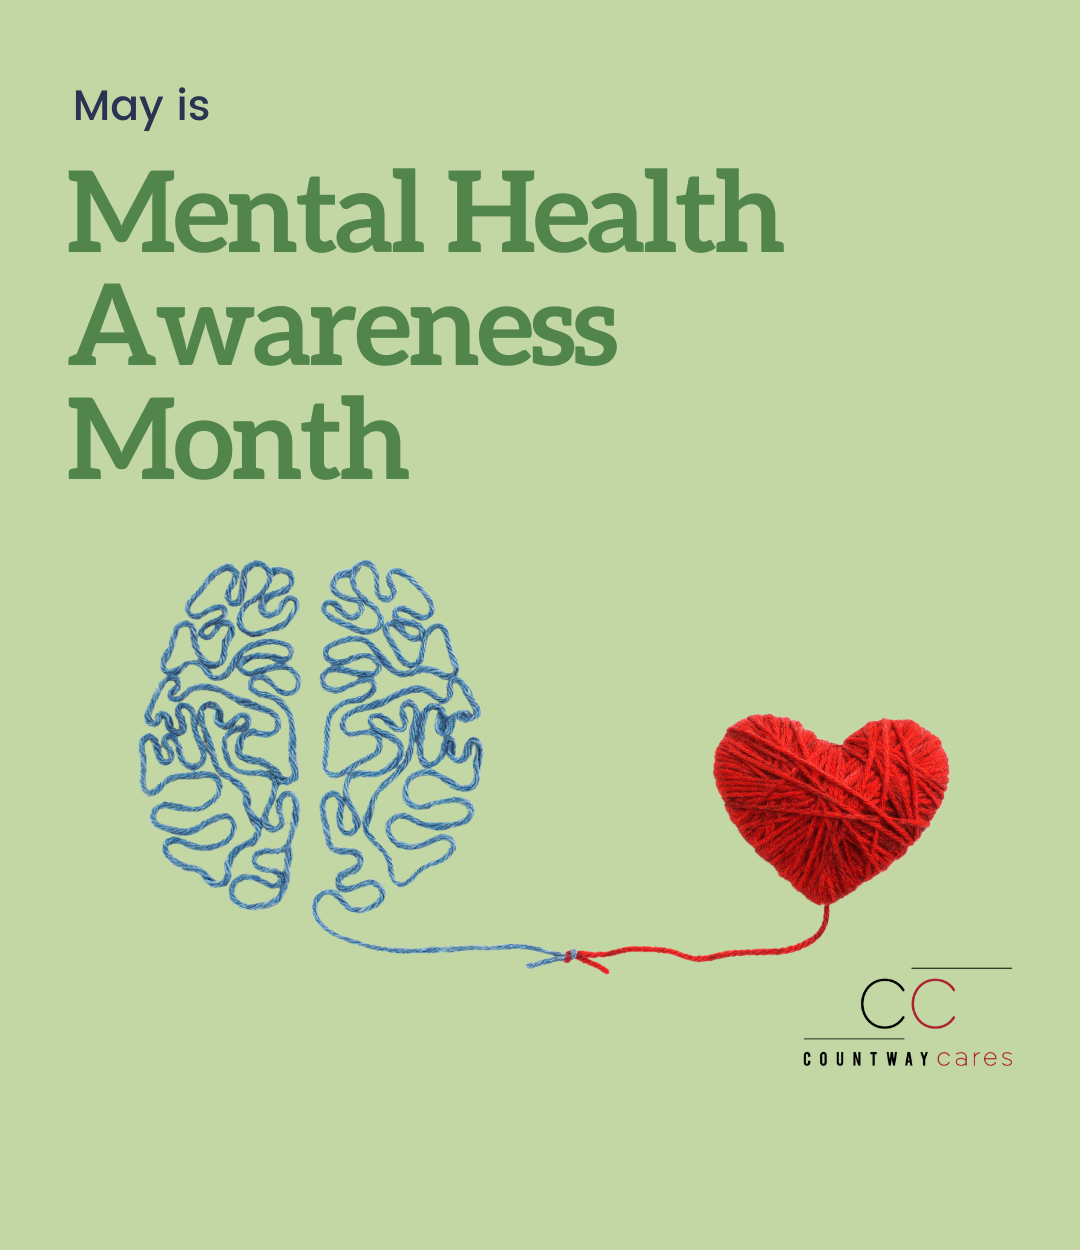 May Is Mental Health Awareness Month - Countway Cares